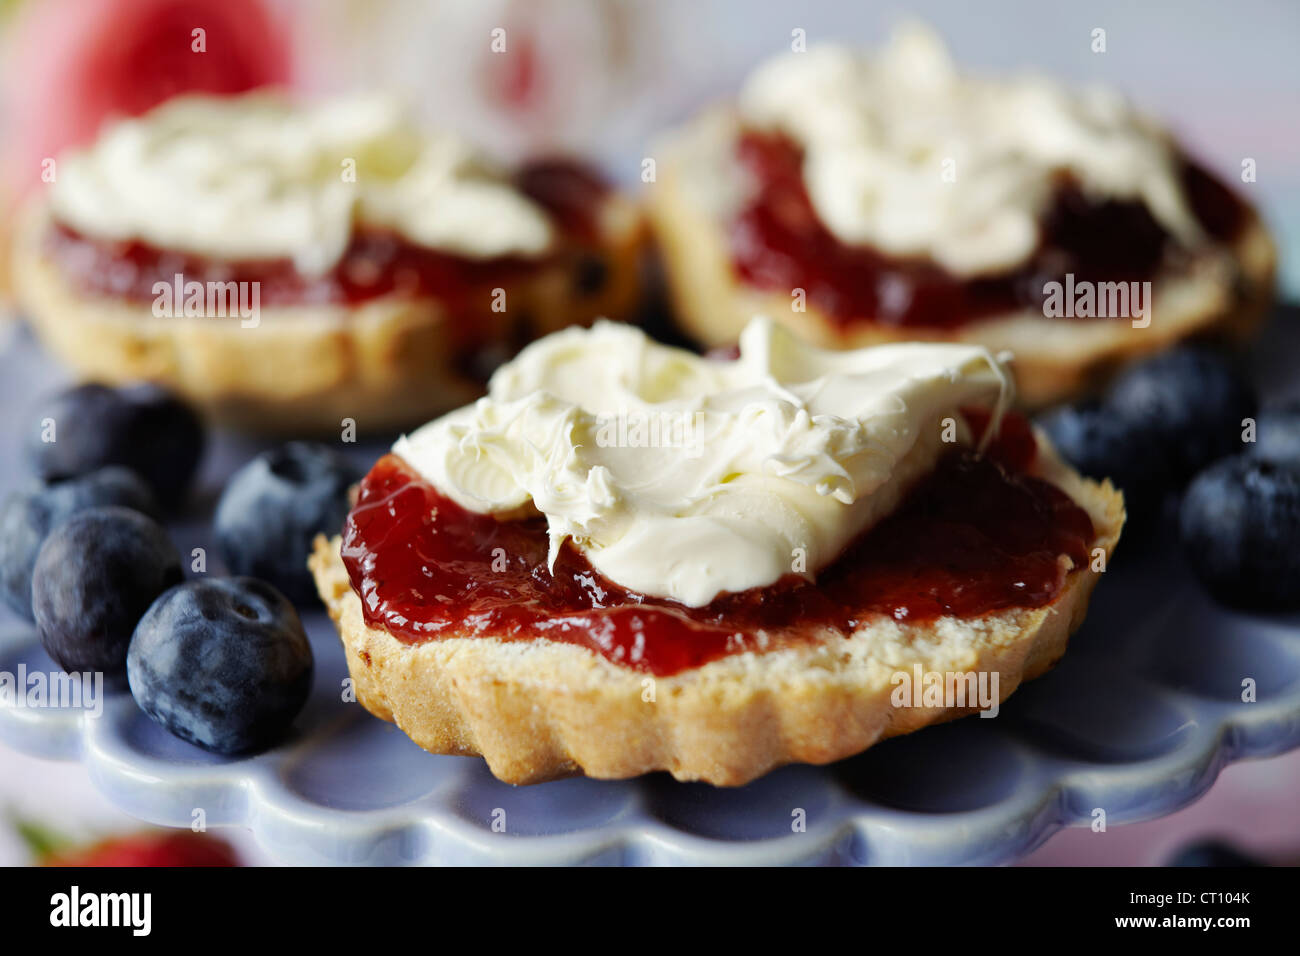 Close up of sliced scone with jam Stock Photo